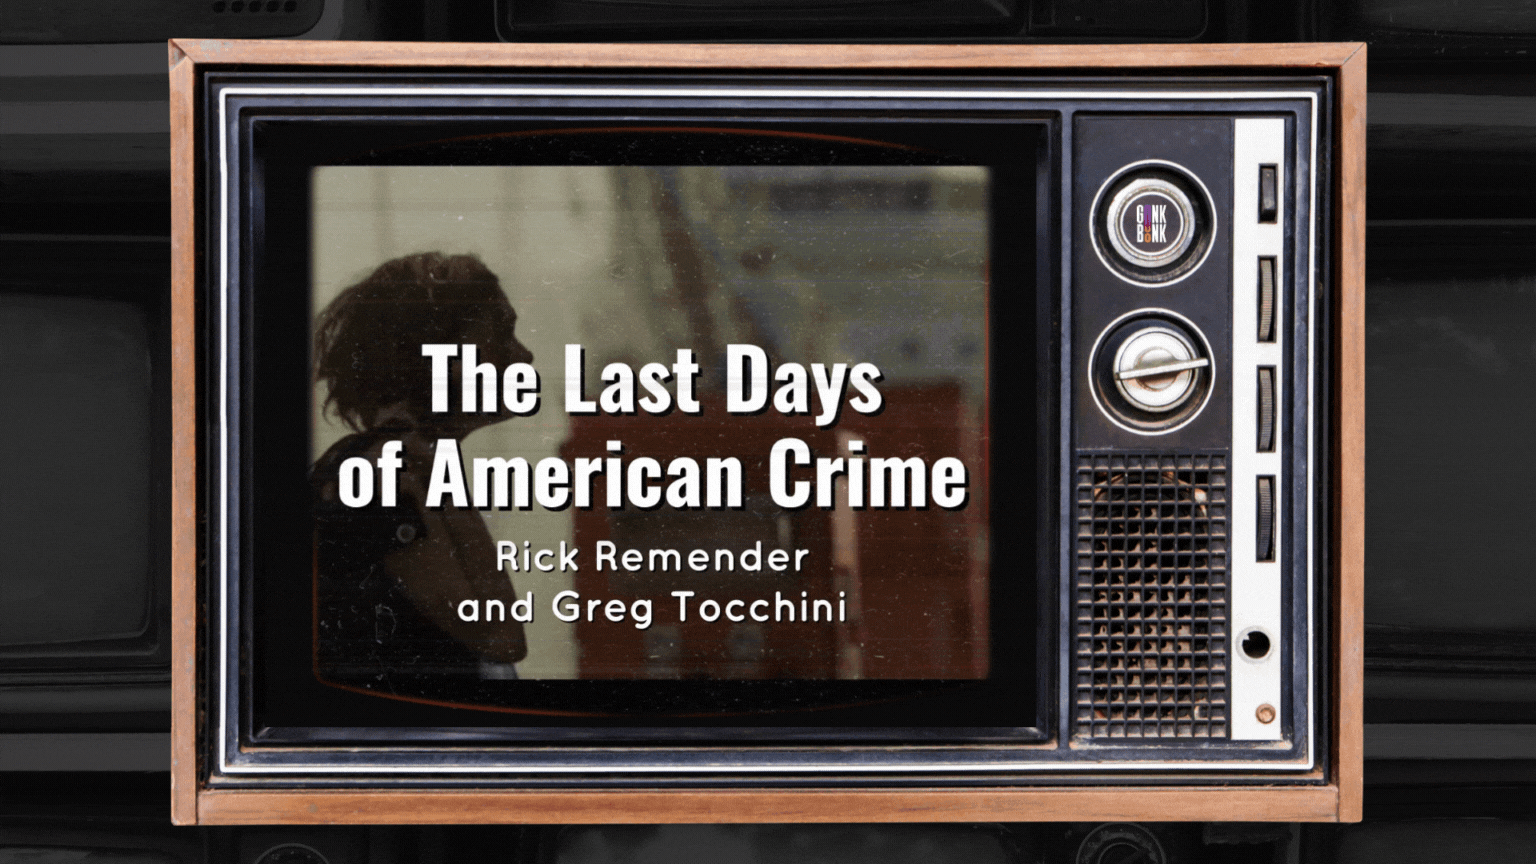 The Last Days of American Crime Movie and Comics